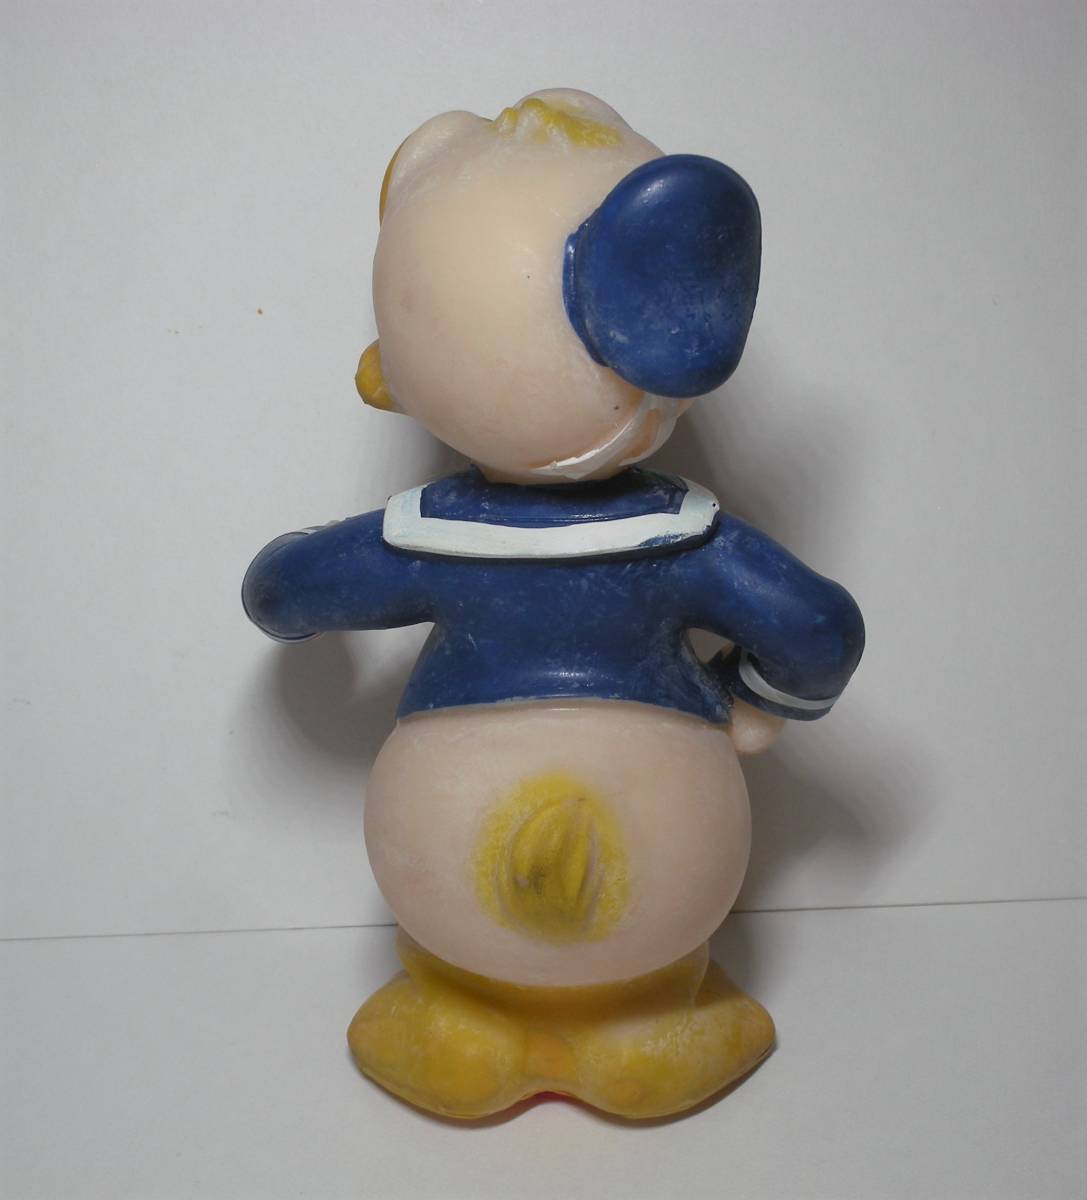  Donald * Duck Donald Fauntleroy Duck sofvi doll softly ., push . sound . comes out. approximately 15,5cm search Mickey Mouse 